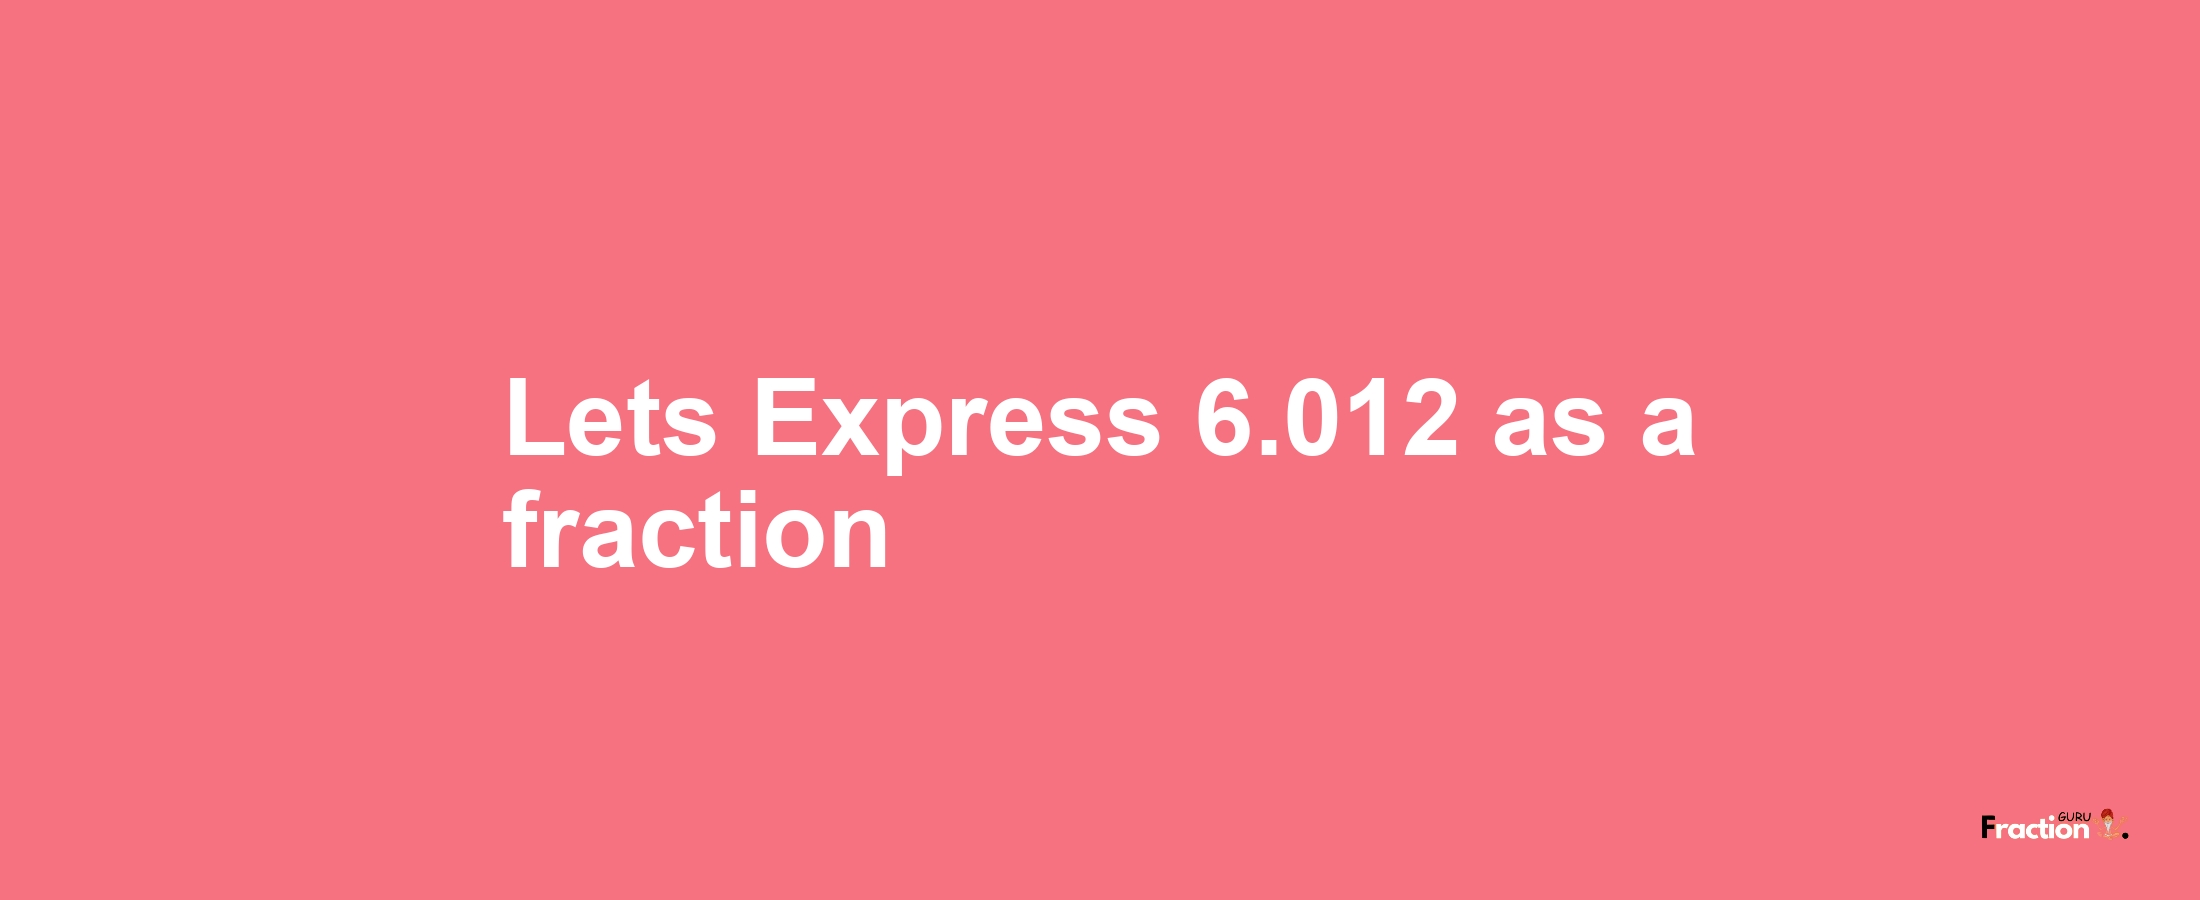 Lets Express 6.012 as afraction